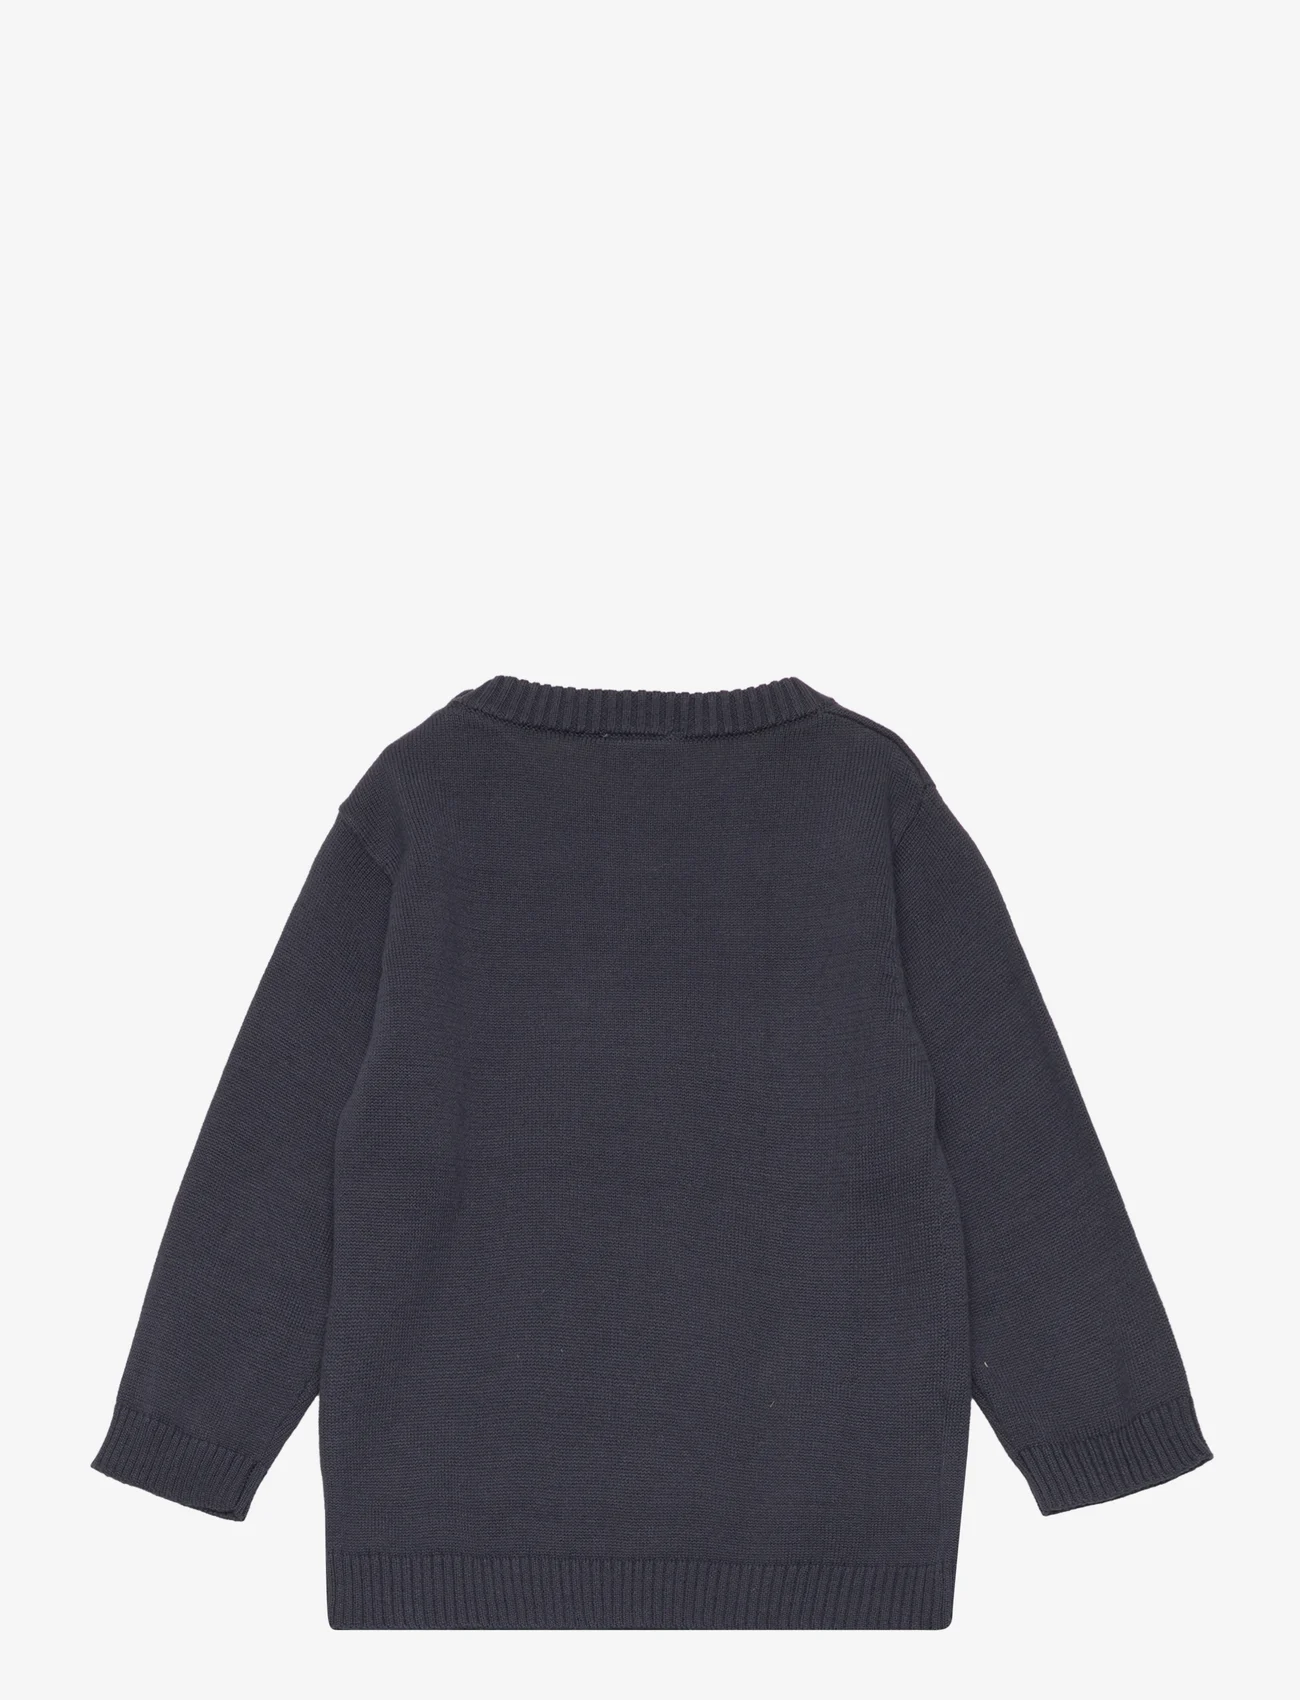 Hust & Claire - Pilou - Pullover - jumpers - blue night - 1